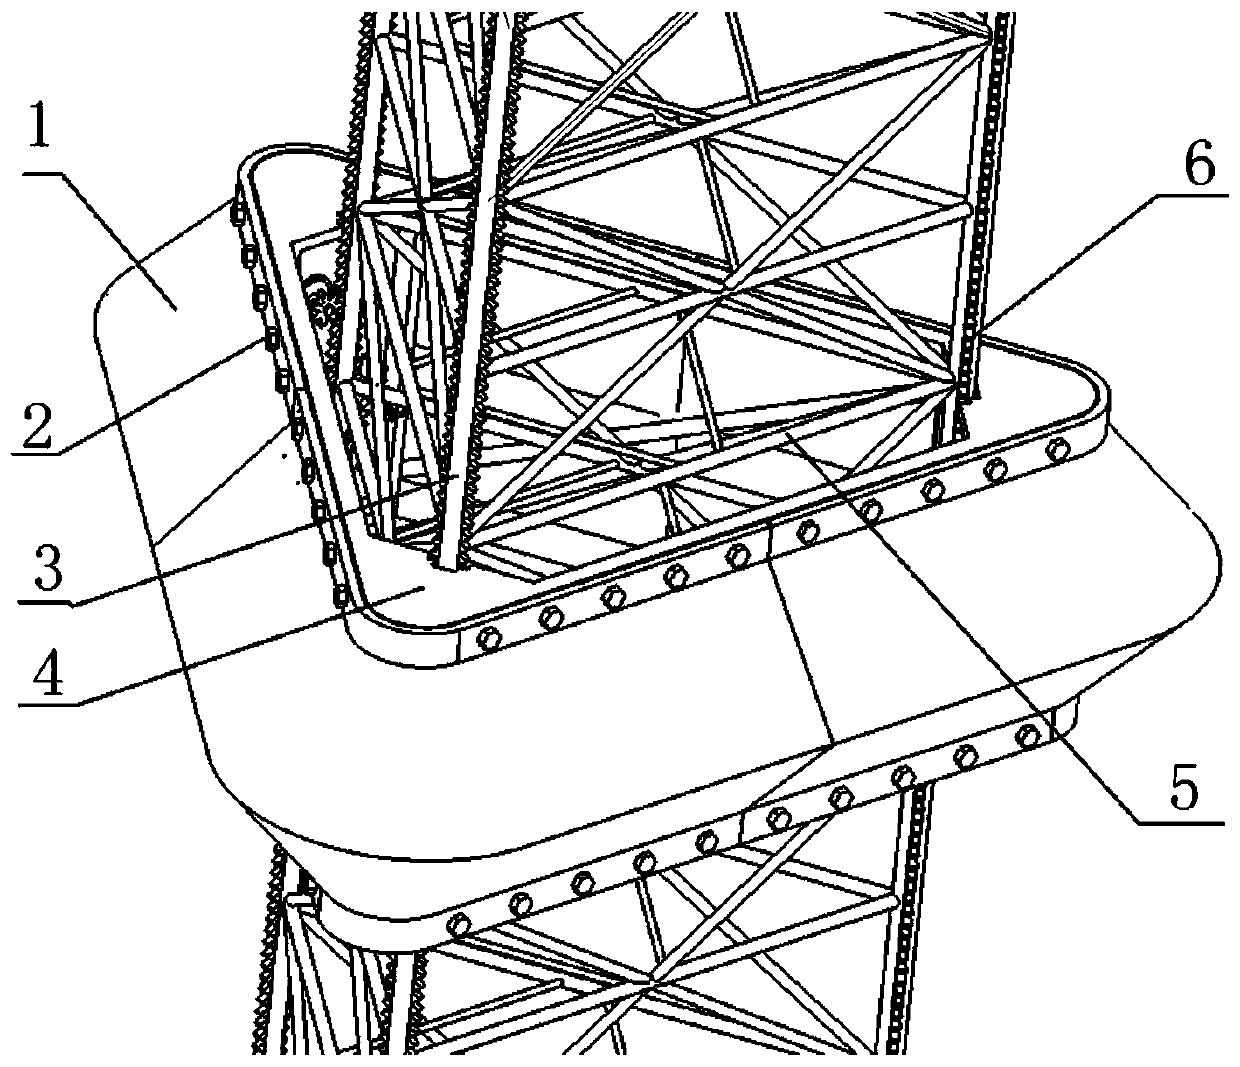 A liftable anti-icing device suitable for self-elevating offshore platforms with truss legs